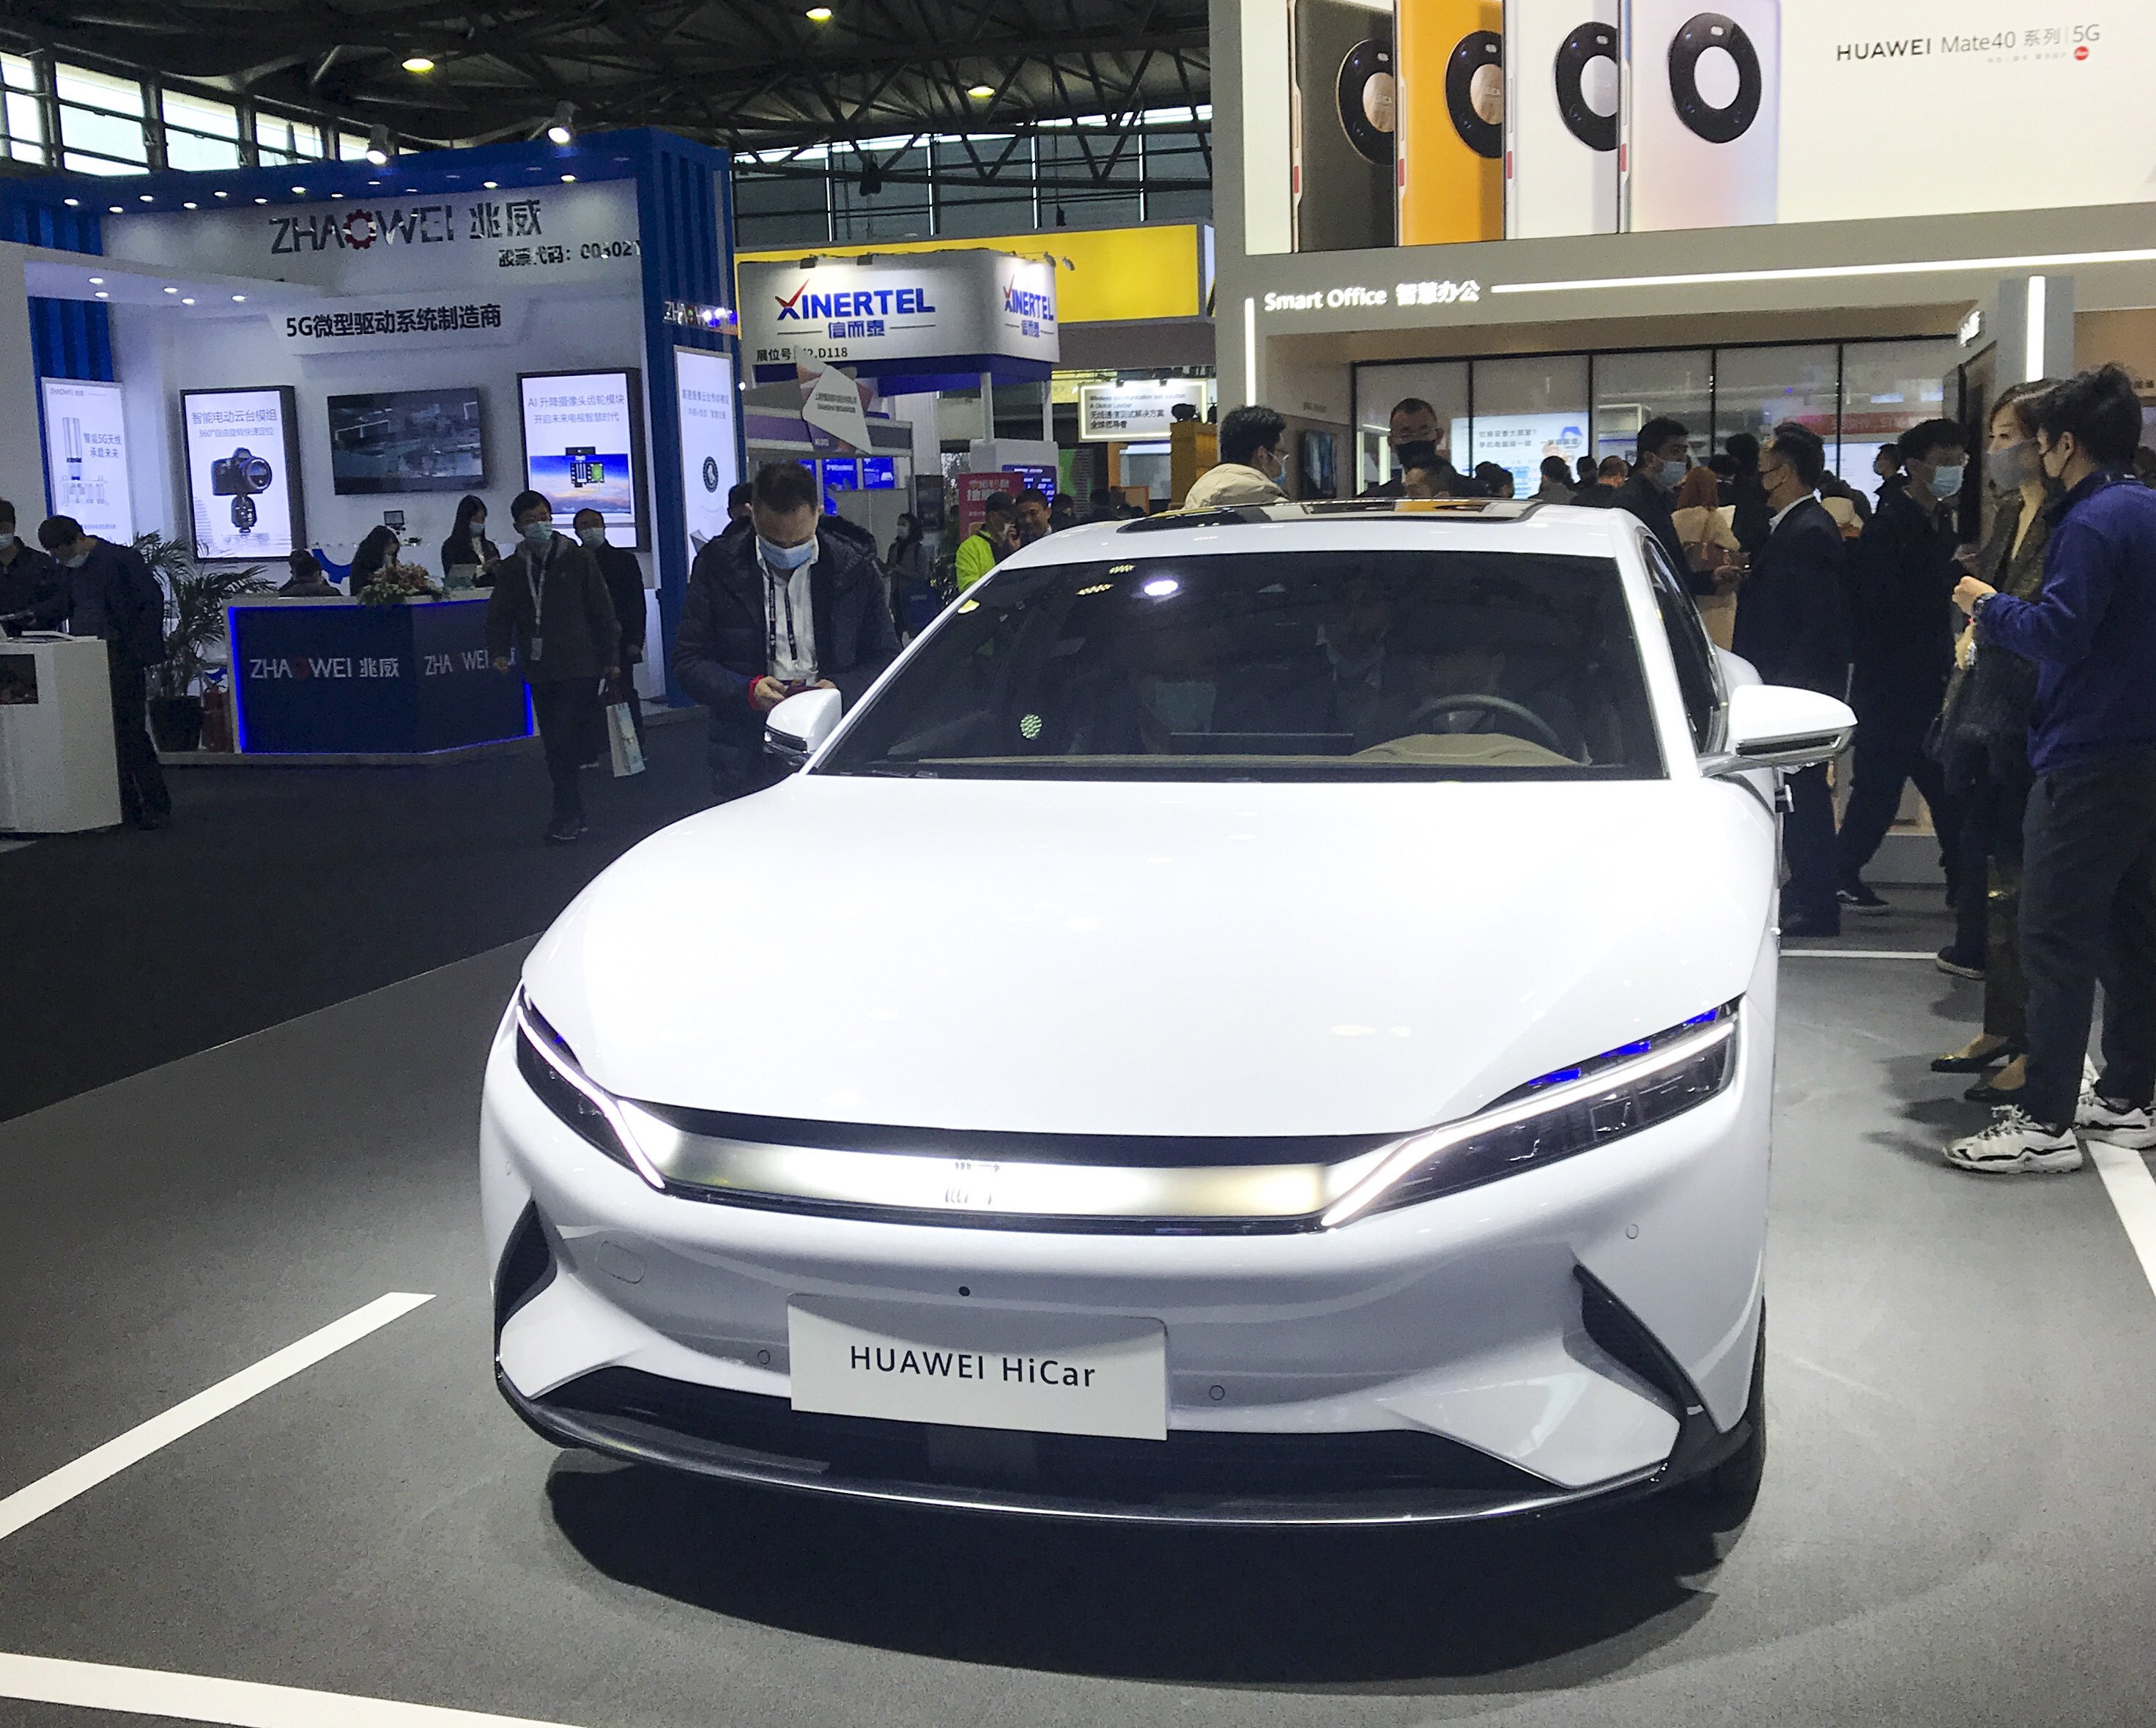 Huawei revs up drive for 5G-equipped smart electric cars with launch of Arcfox luxury sedan | South China Morning Post